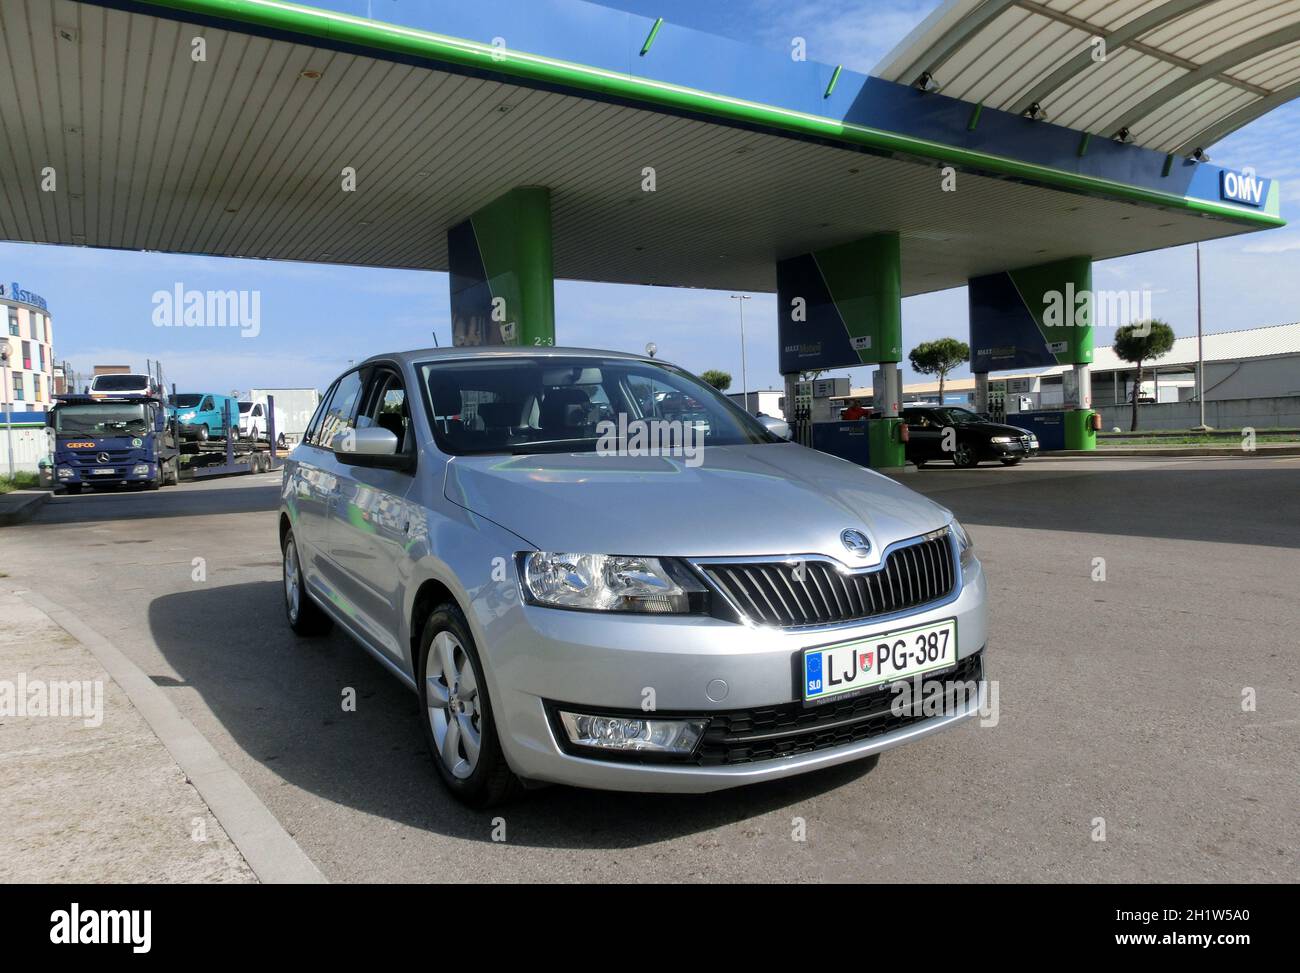 Nurnberg, Germany - June 03, 2014: OMV petrol filling station. OMV was founded in 1956 and is the Austria's largest oil industry company Stock Photo